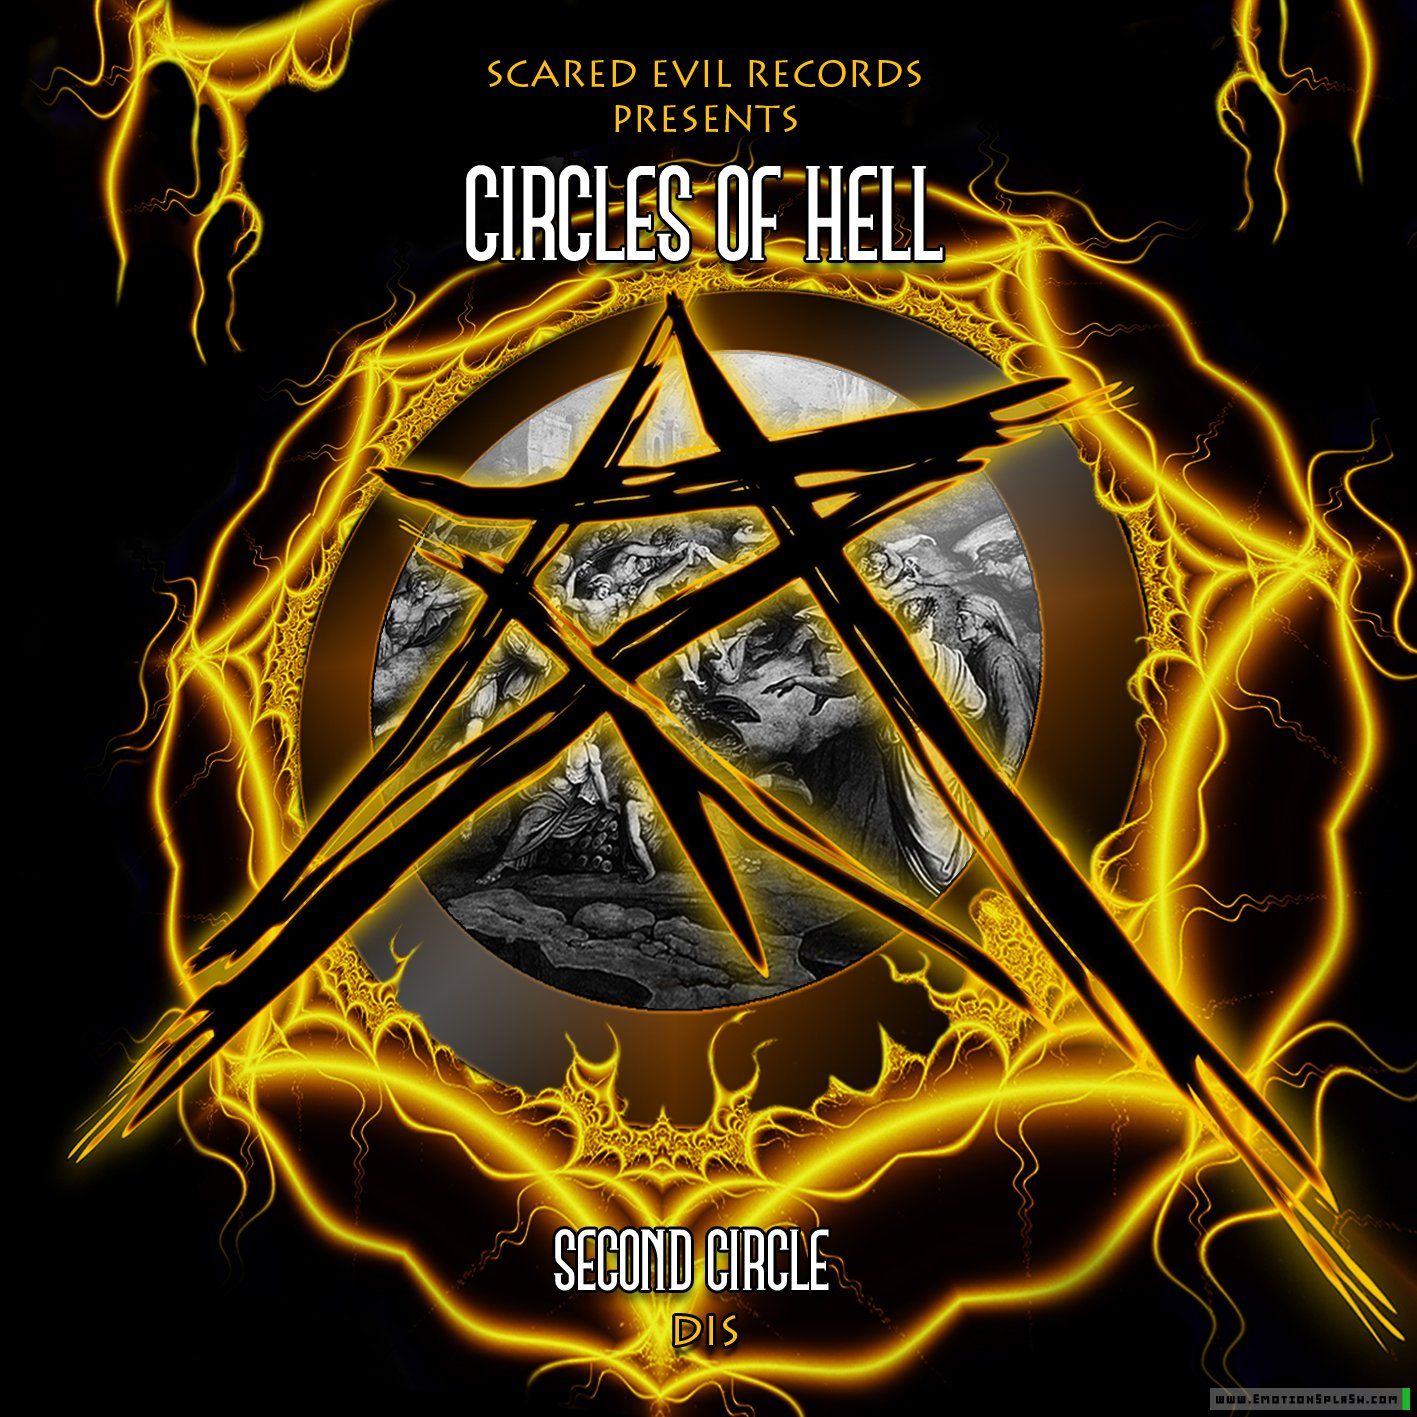 9th circle of hell trance mp3 torrent semi-pro 2008 torrent